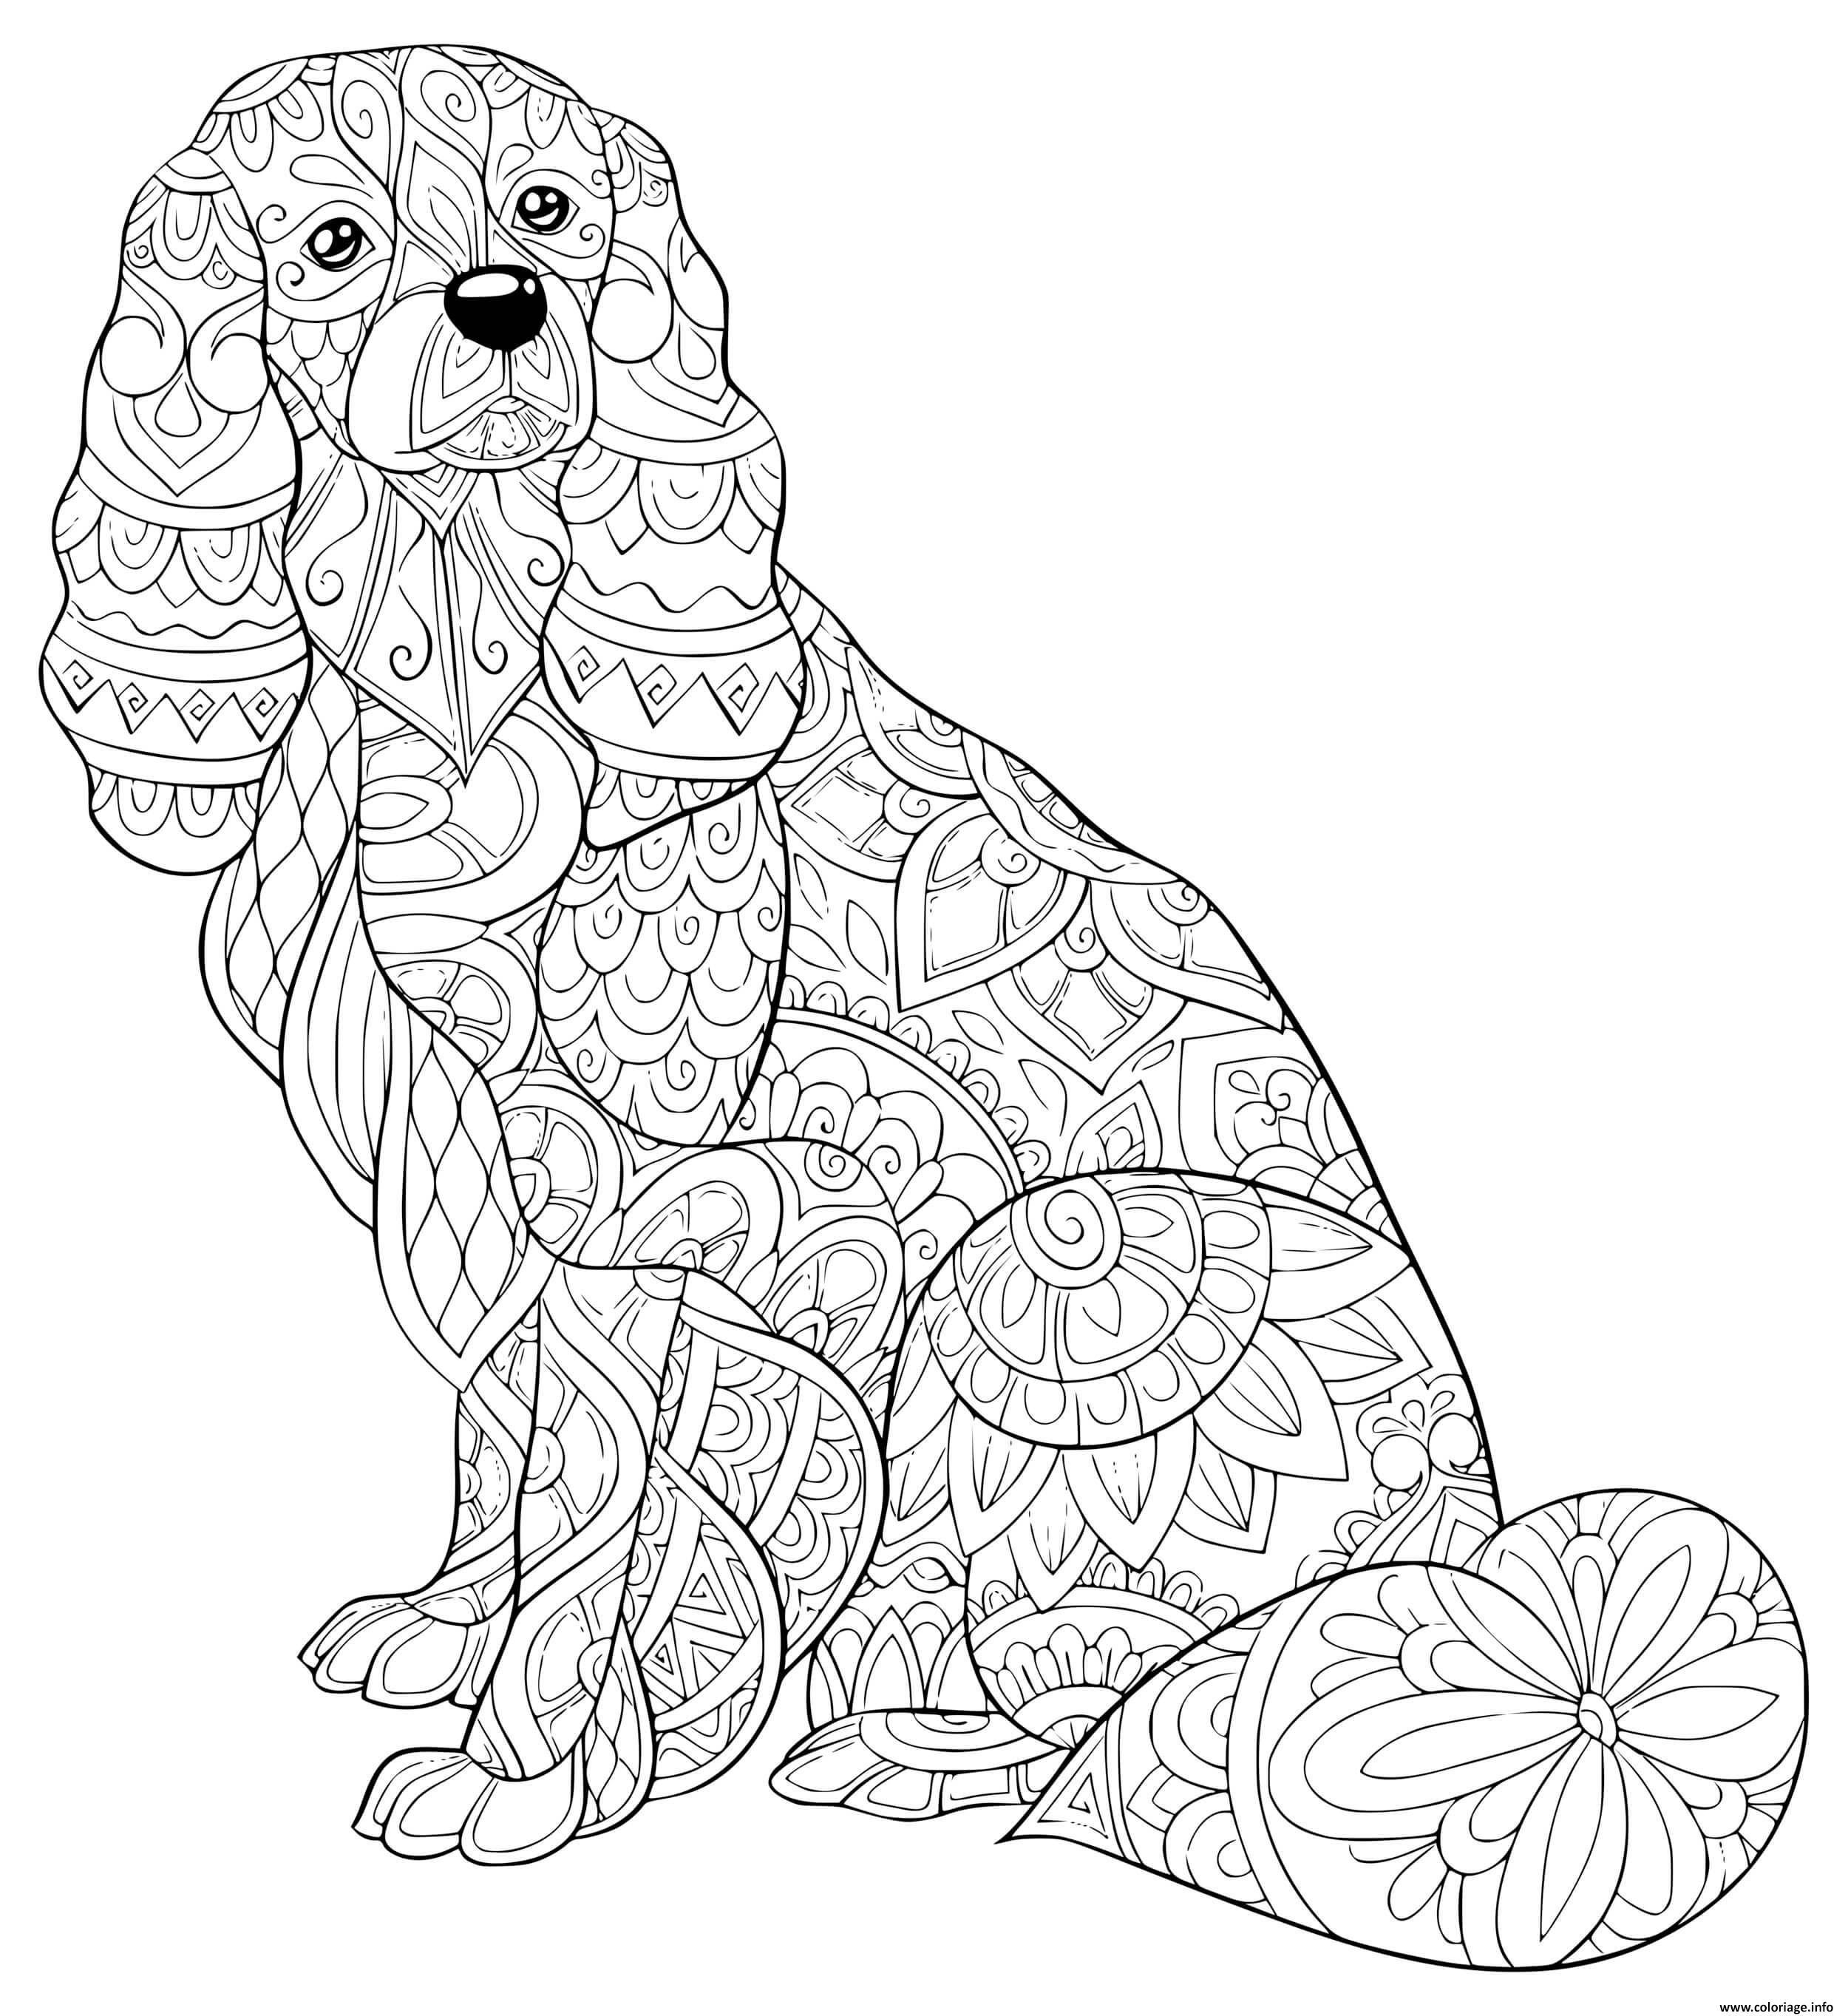 dog-coloring-pages-for-adults-best-coloring-pages-for-kids